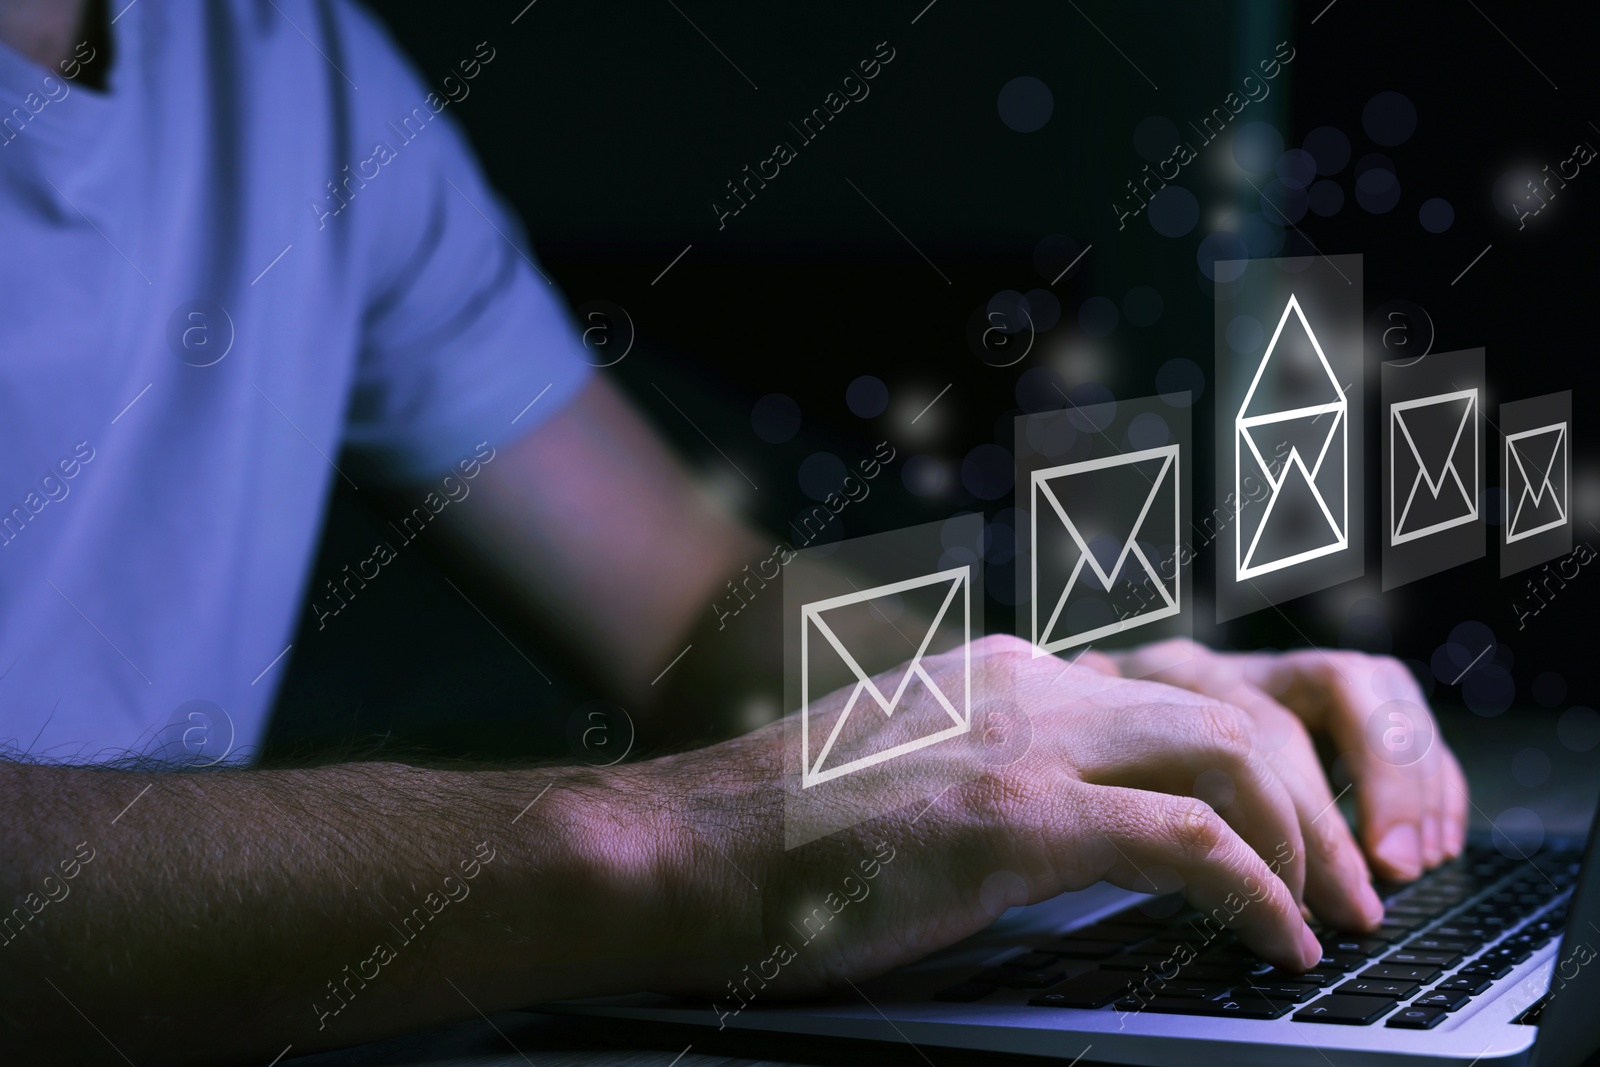 Image of Email. Man using laptop at table, closeup. Letter illustrations over device